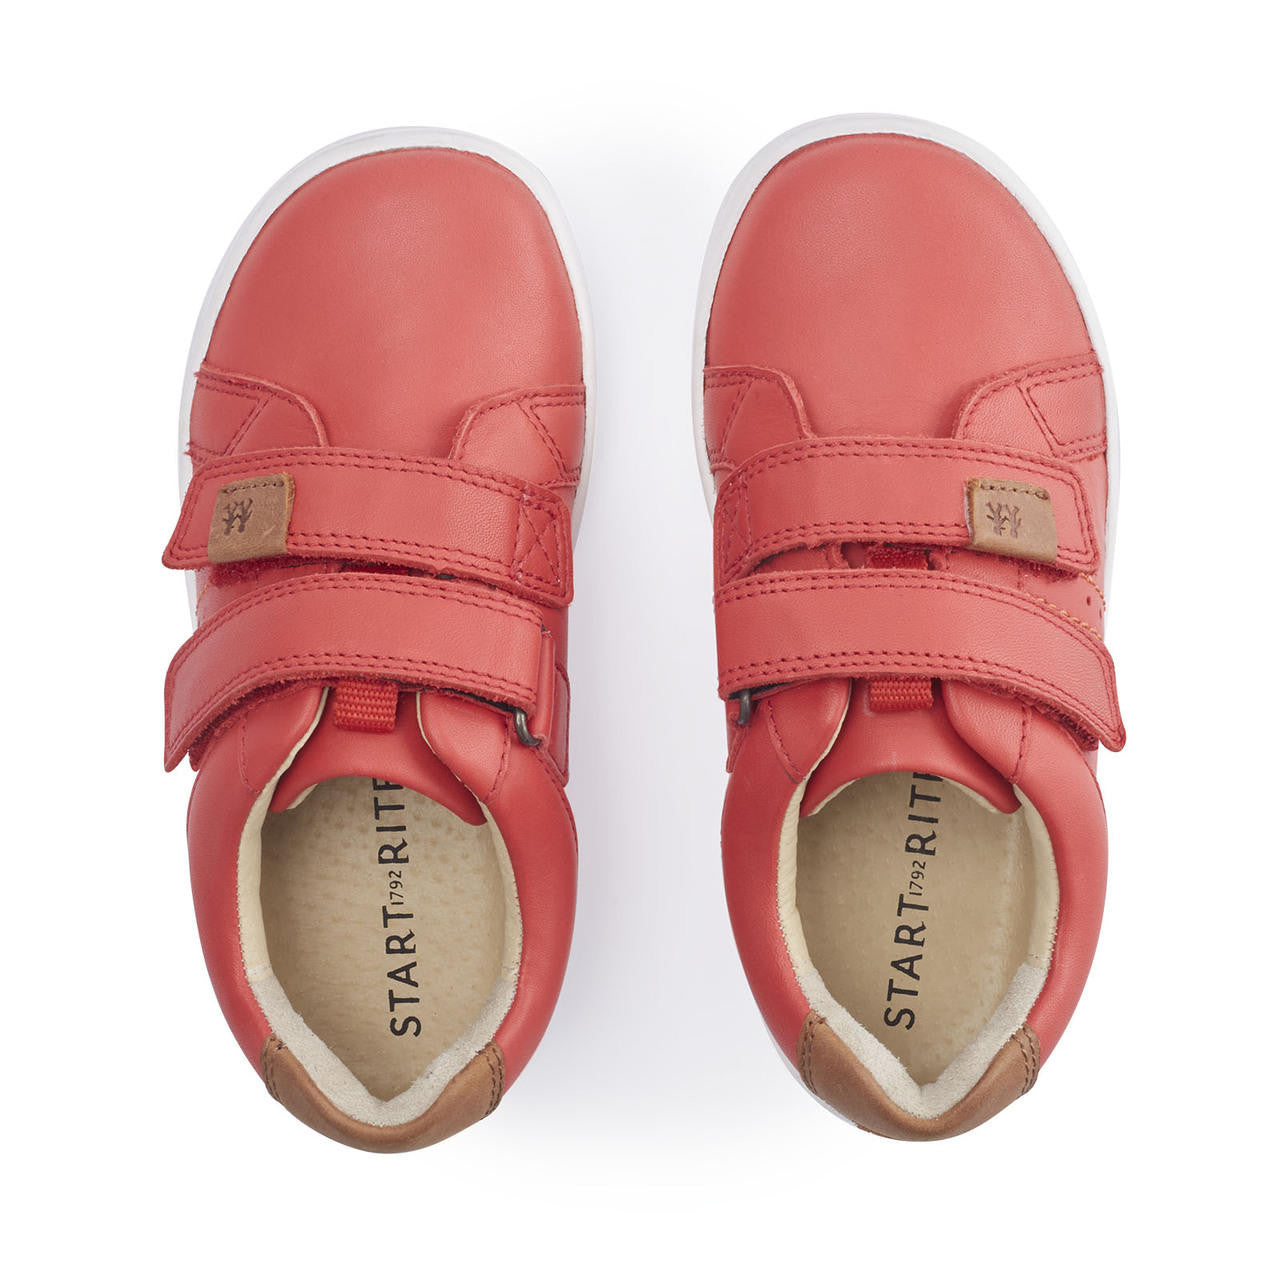 A pair of boys casual shoes by Start Rite, style Explore, in red leather with double velcro fastening. Top view.